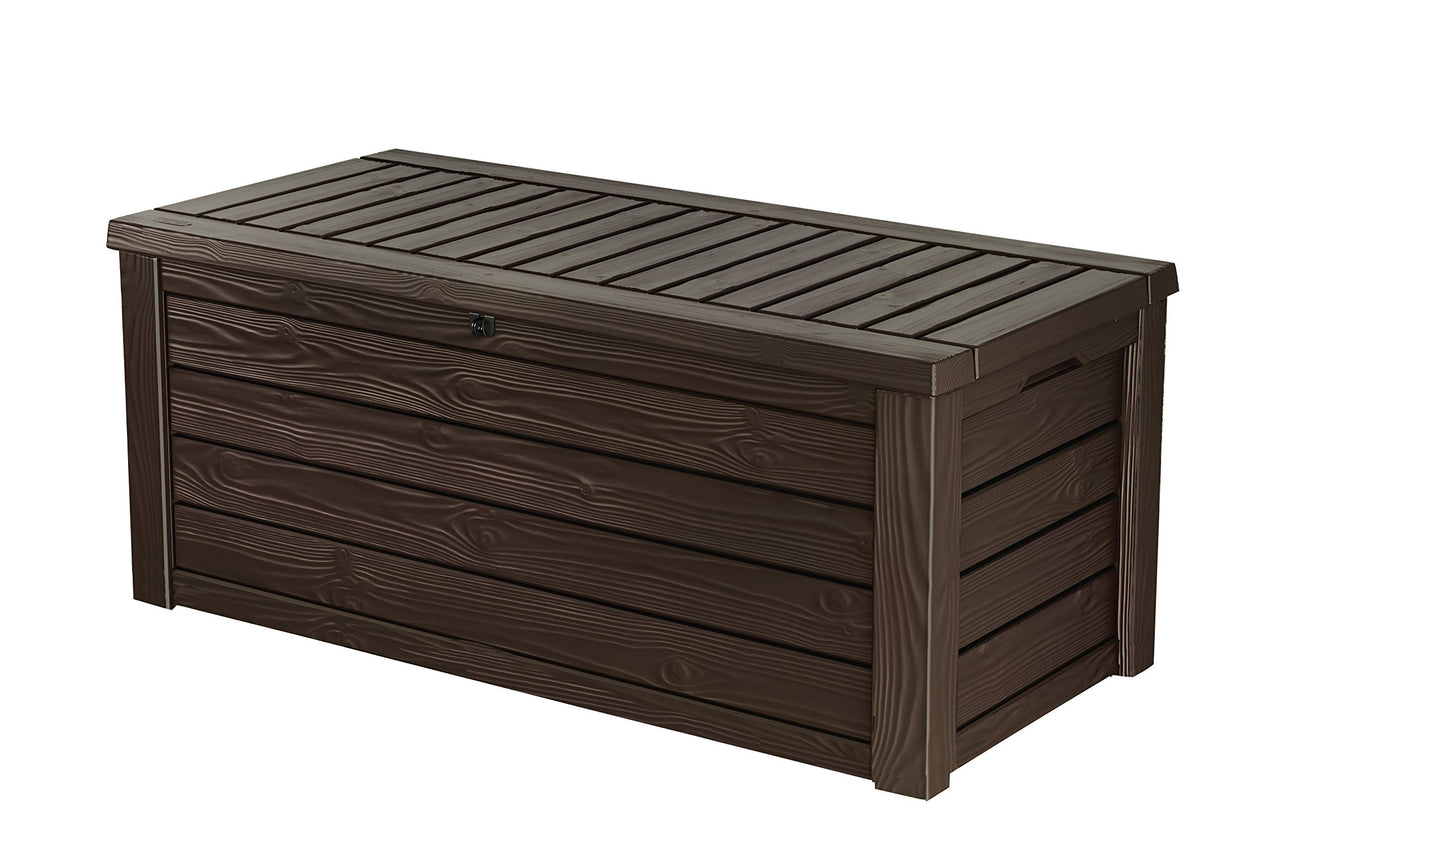 Rubbermaid Patio Chic Resin Weather Resistant Outdoor Storage Deck Box, 123 Gal, Black Oak Rattan Wicker Basket Weave, Outdoor Cushions, Garden Tools, Pool Toys, Brown Cabinet + Large Deck Box 150GL